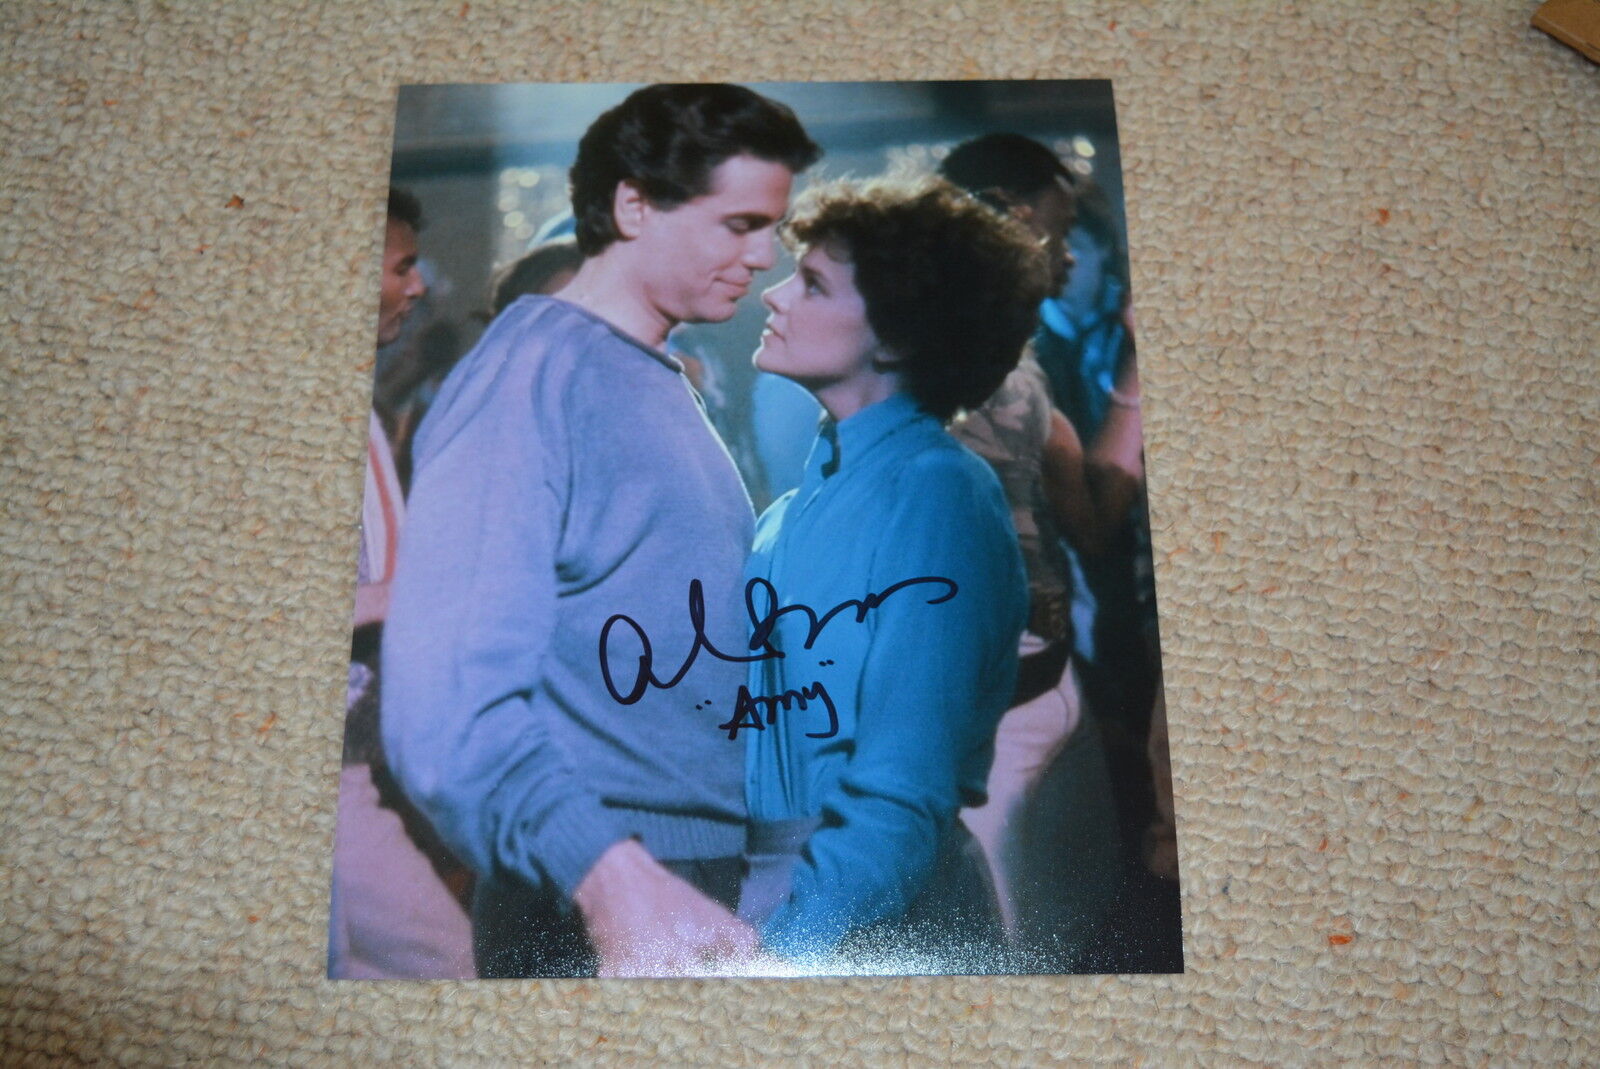 AMANDA BEARSE signed autograph In Person 8x10 (20x25 cm) FRIGHT NIGHT